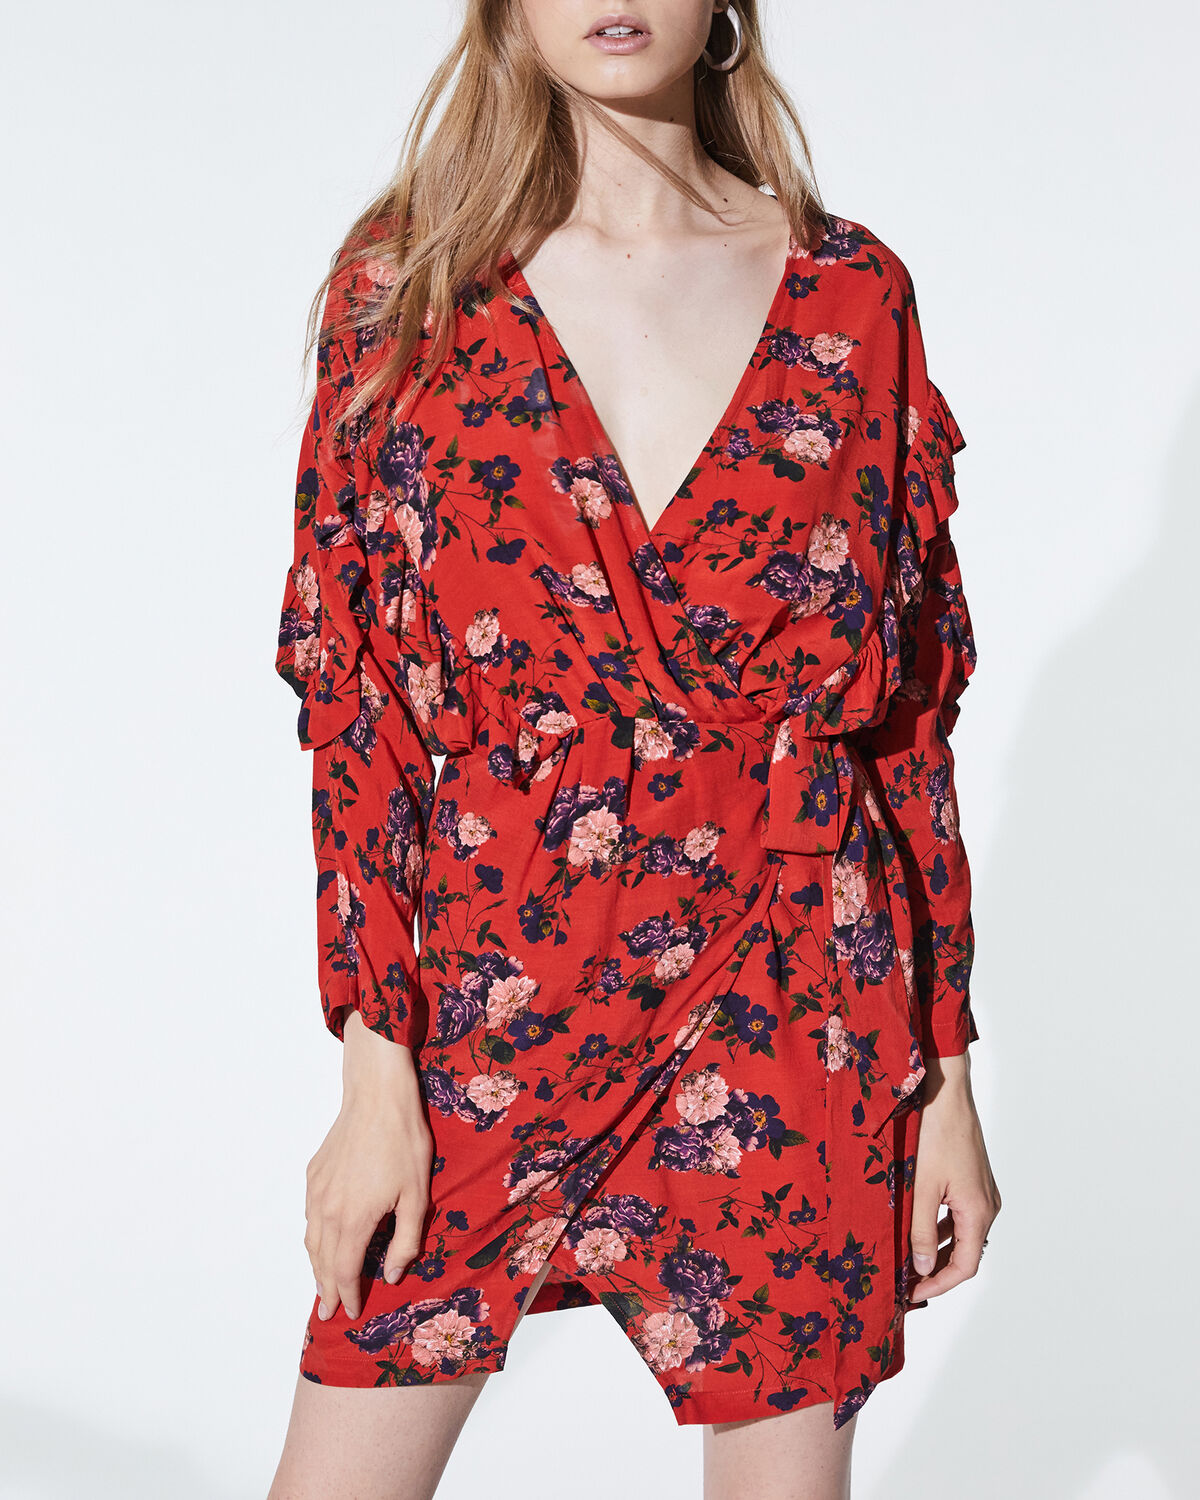 Photo of IRO Paris Nucha Dress Red - This Dress Will Sublimate You By Its Wrap-over Cut And Its Floral Print. Its Plus? Its Flounces On The Sleeves That Will Add A Touch Of Bohemia To Your Outfits. Dresses